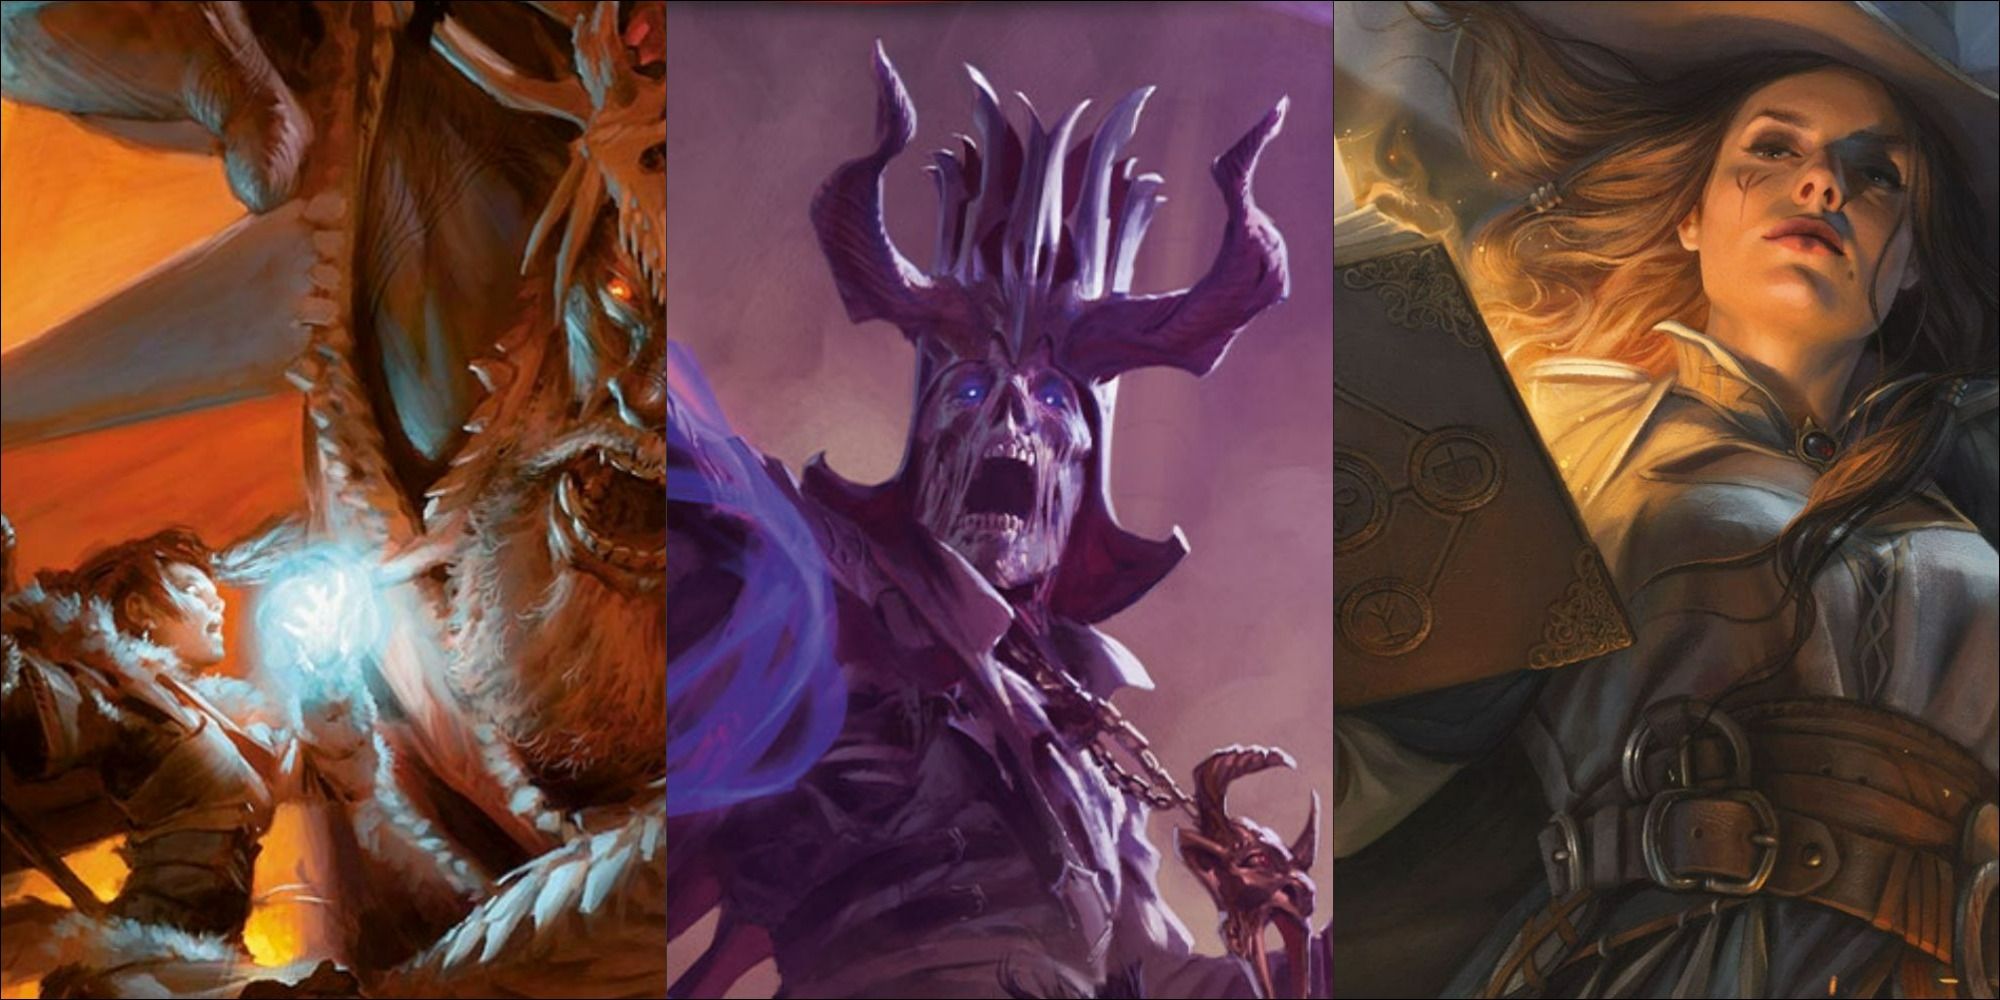 Close-ups of three spellcasting characters from the covers of Dungeons and Dragons books